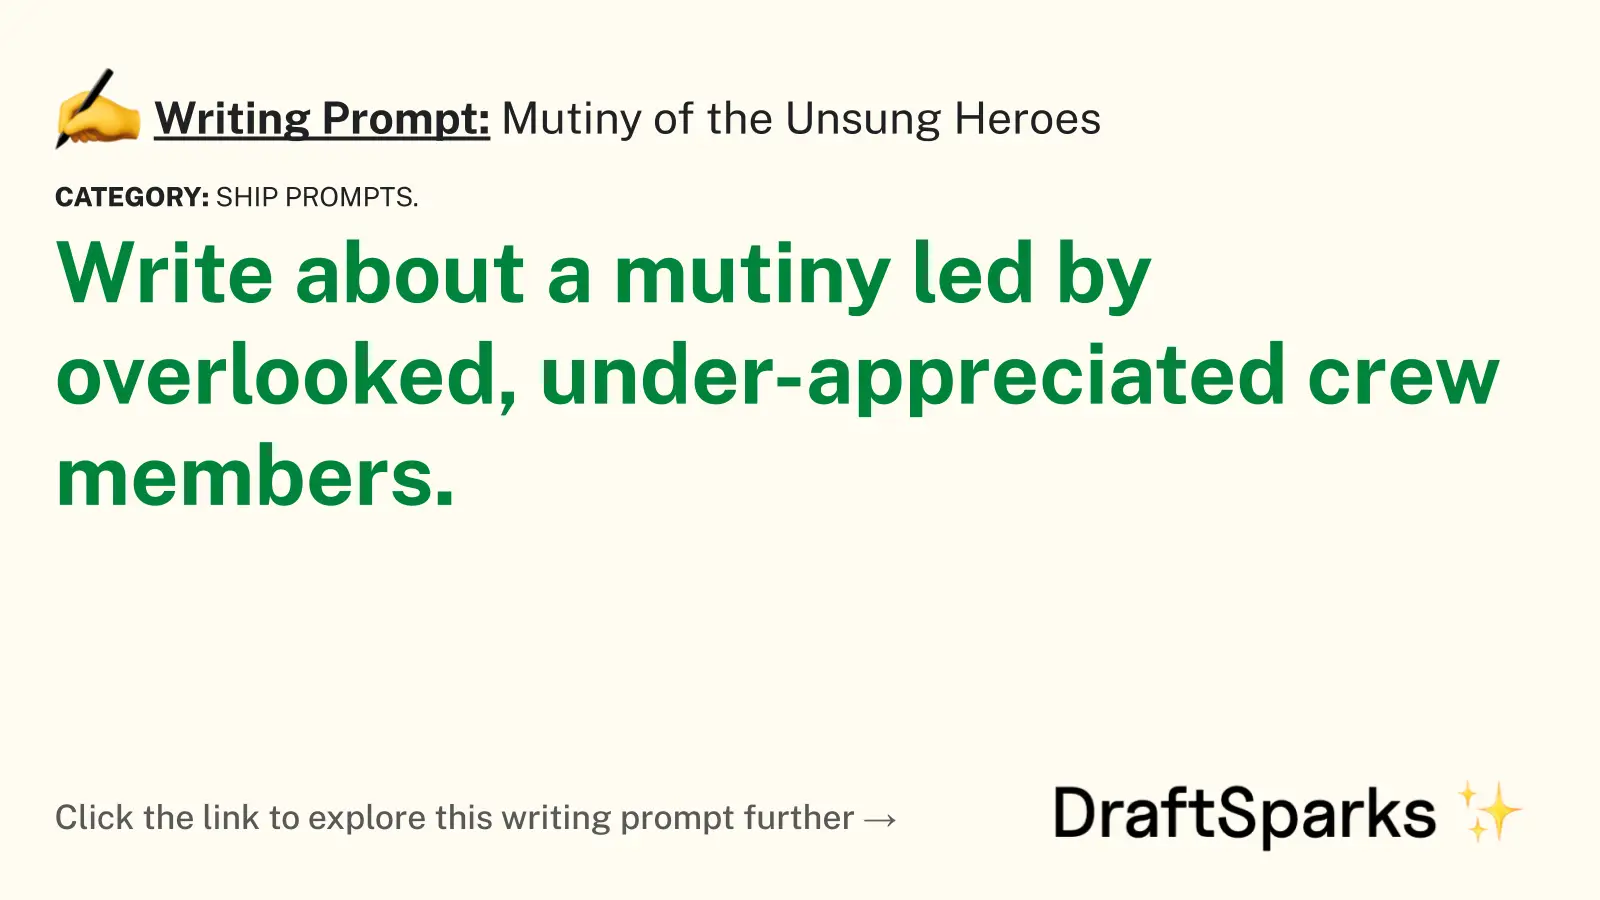 Mutiny of the Unsung Heroes